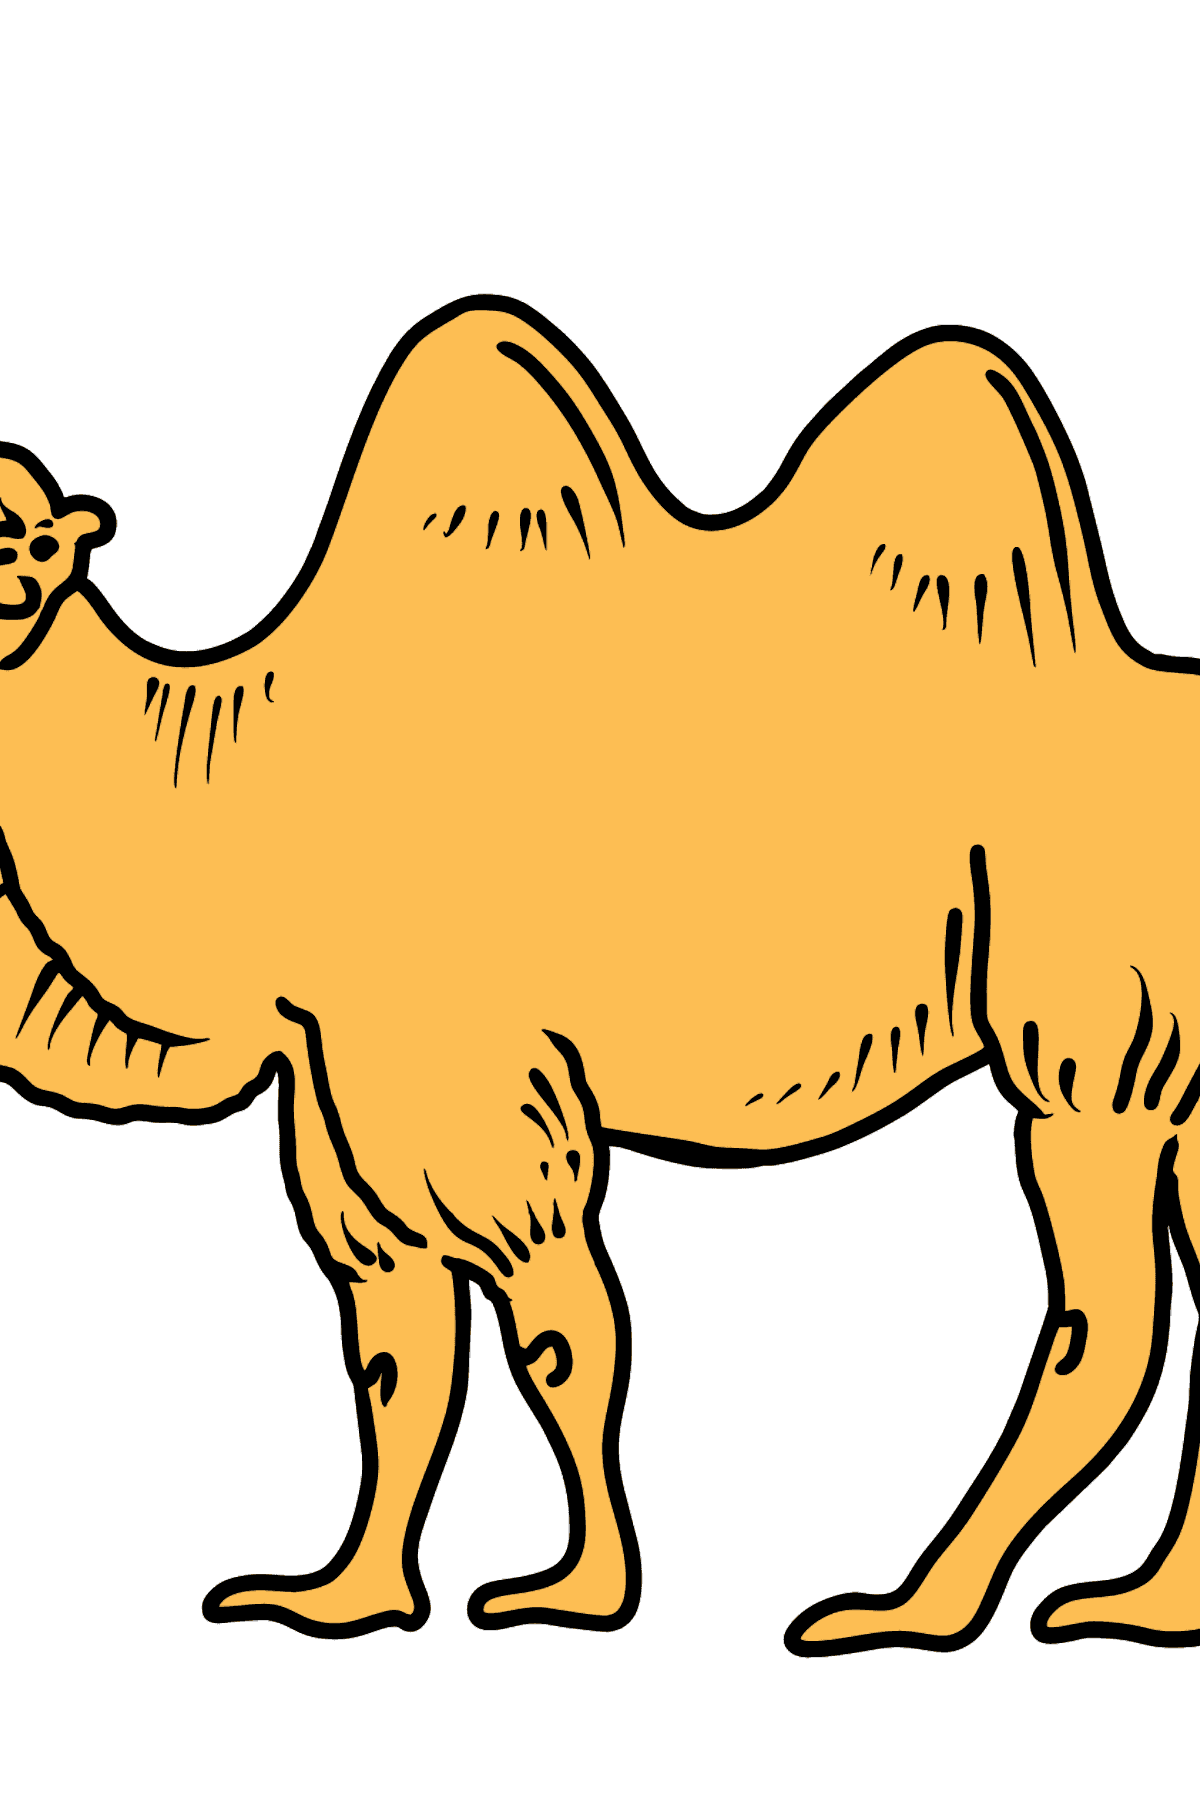 Camel coloring page - Coloring Pages for Kids